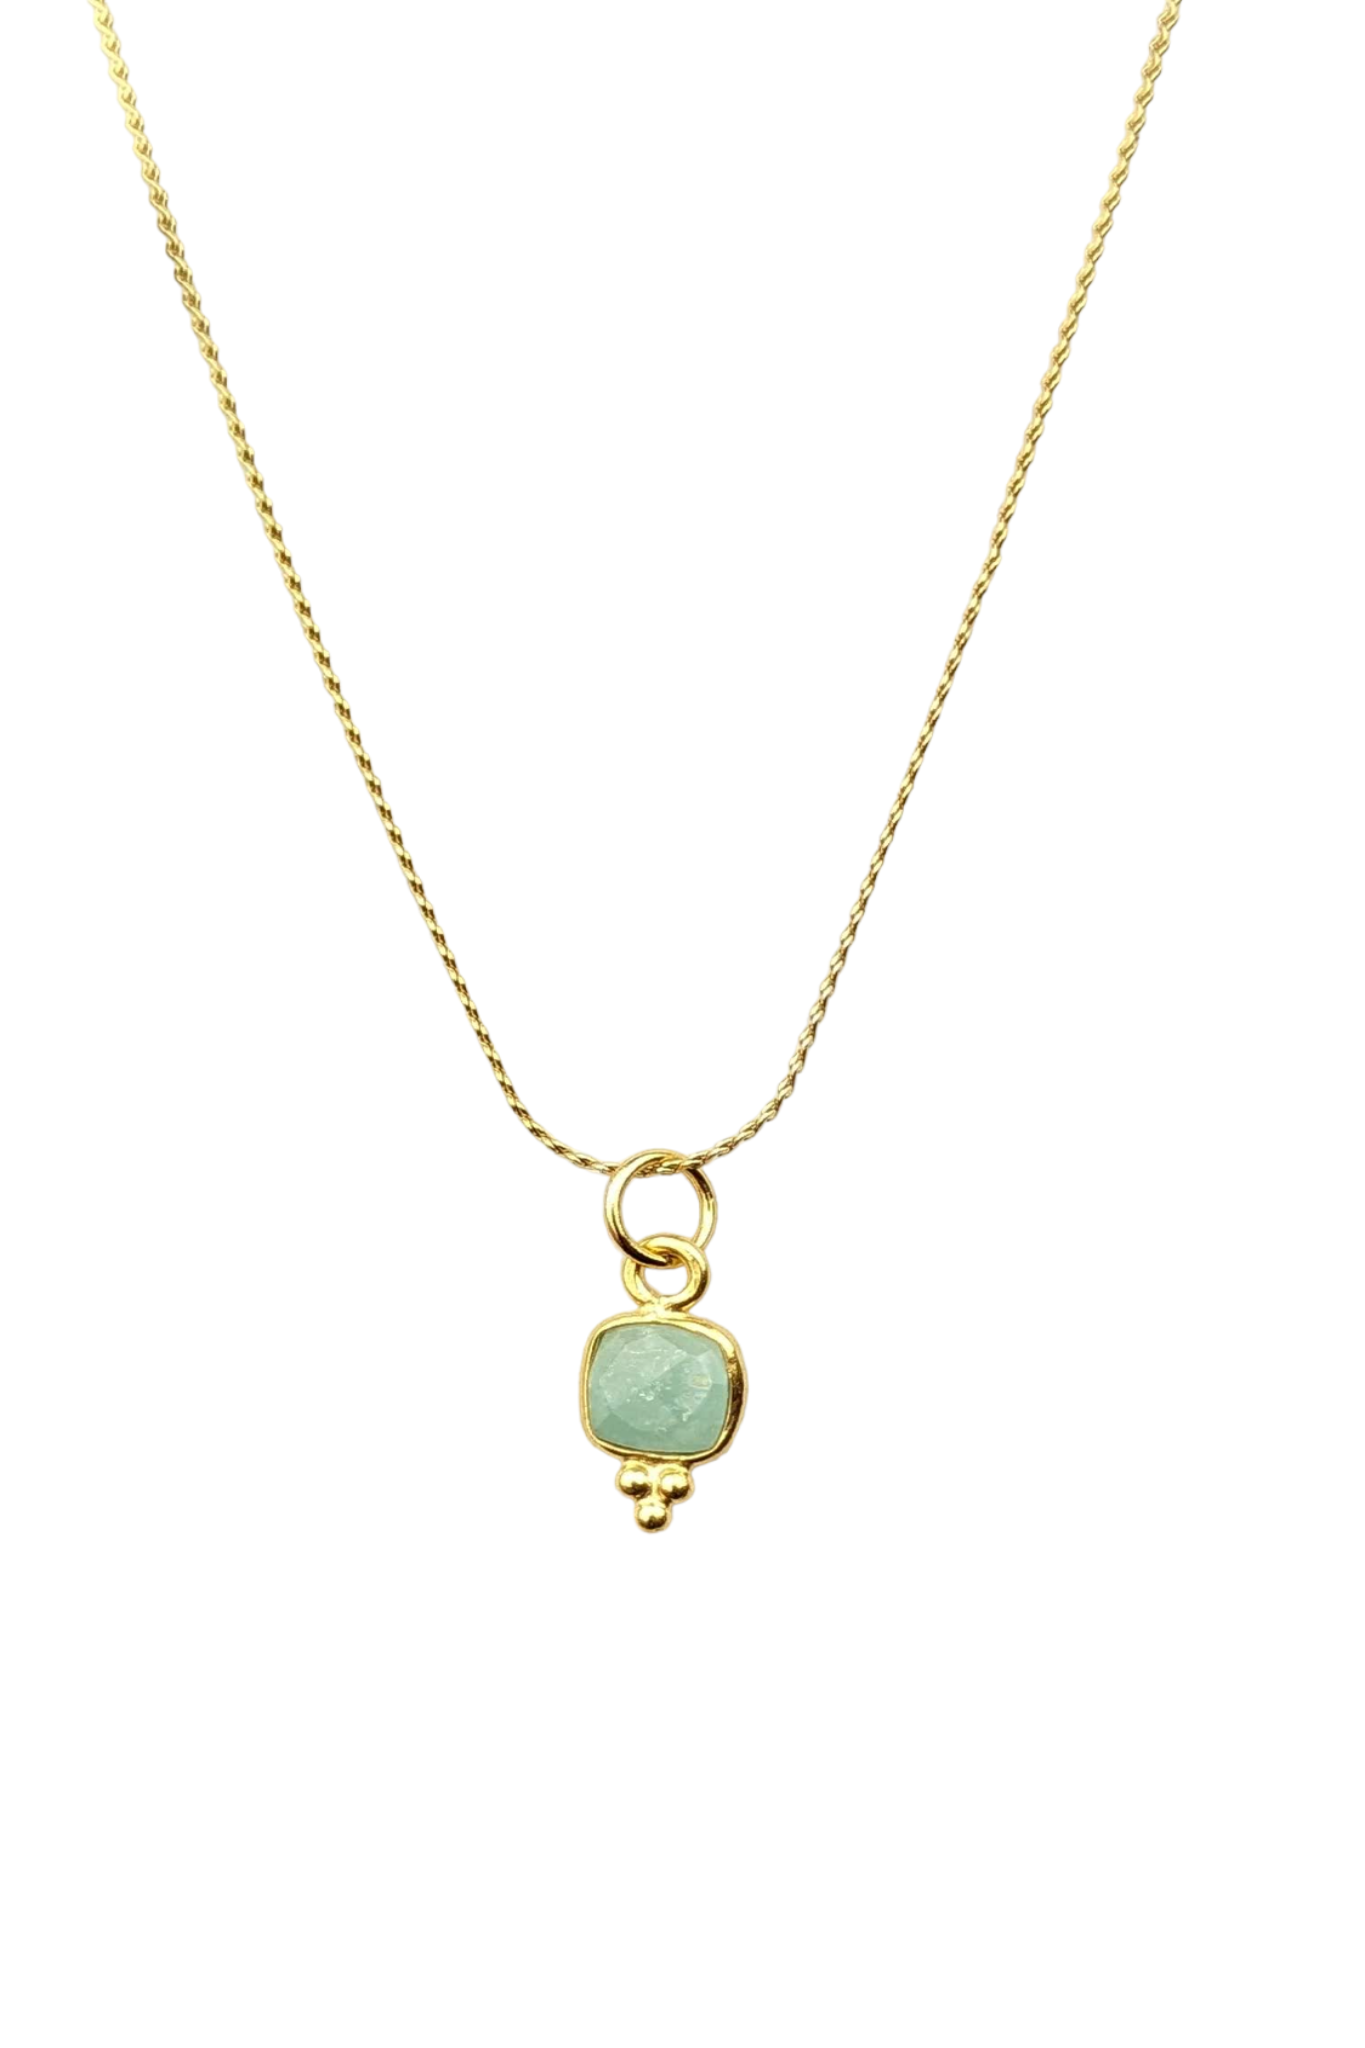 Hope - selfconfidence - throat chakra amazonite necklace stay gold by mme bovary